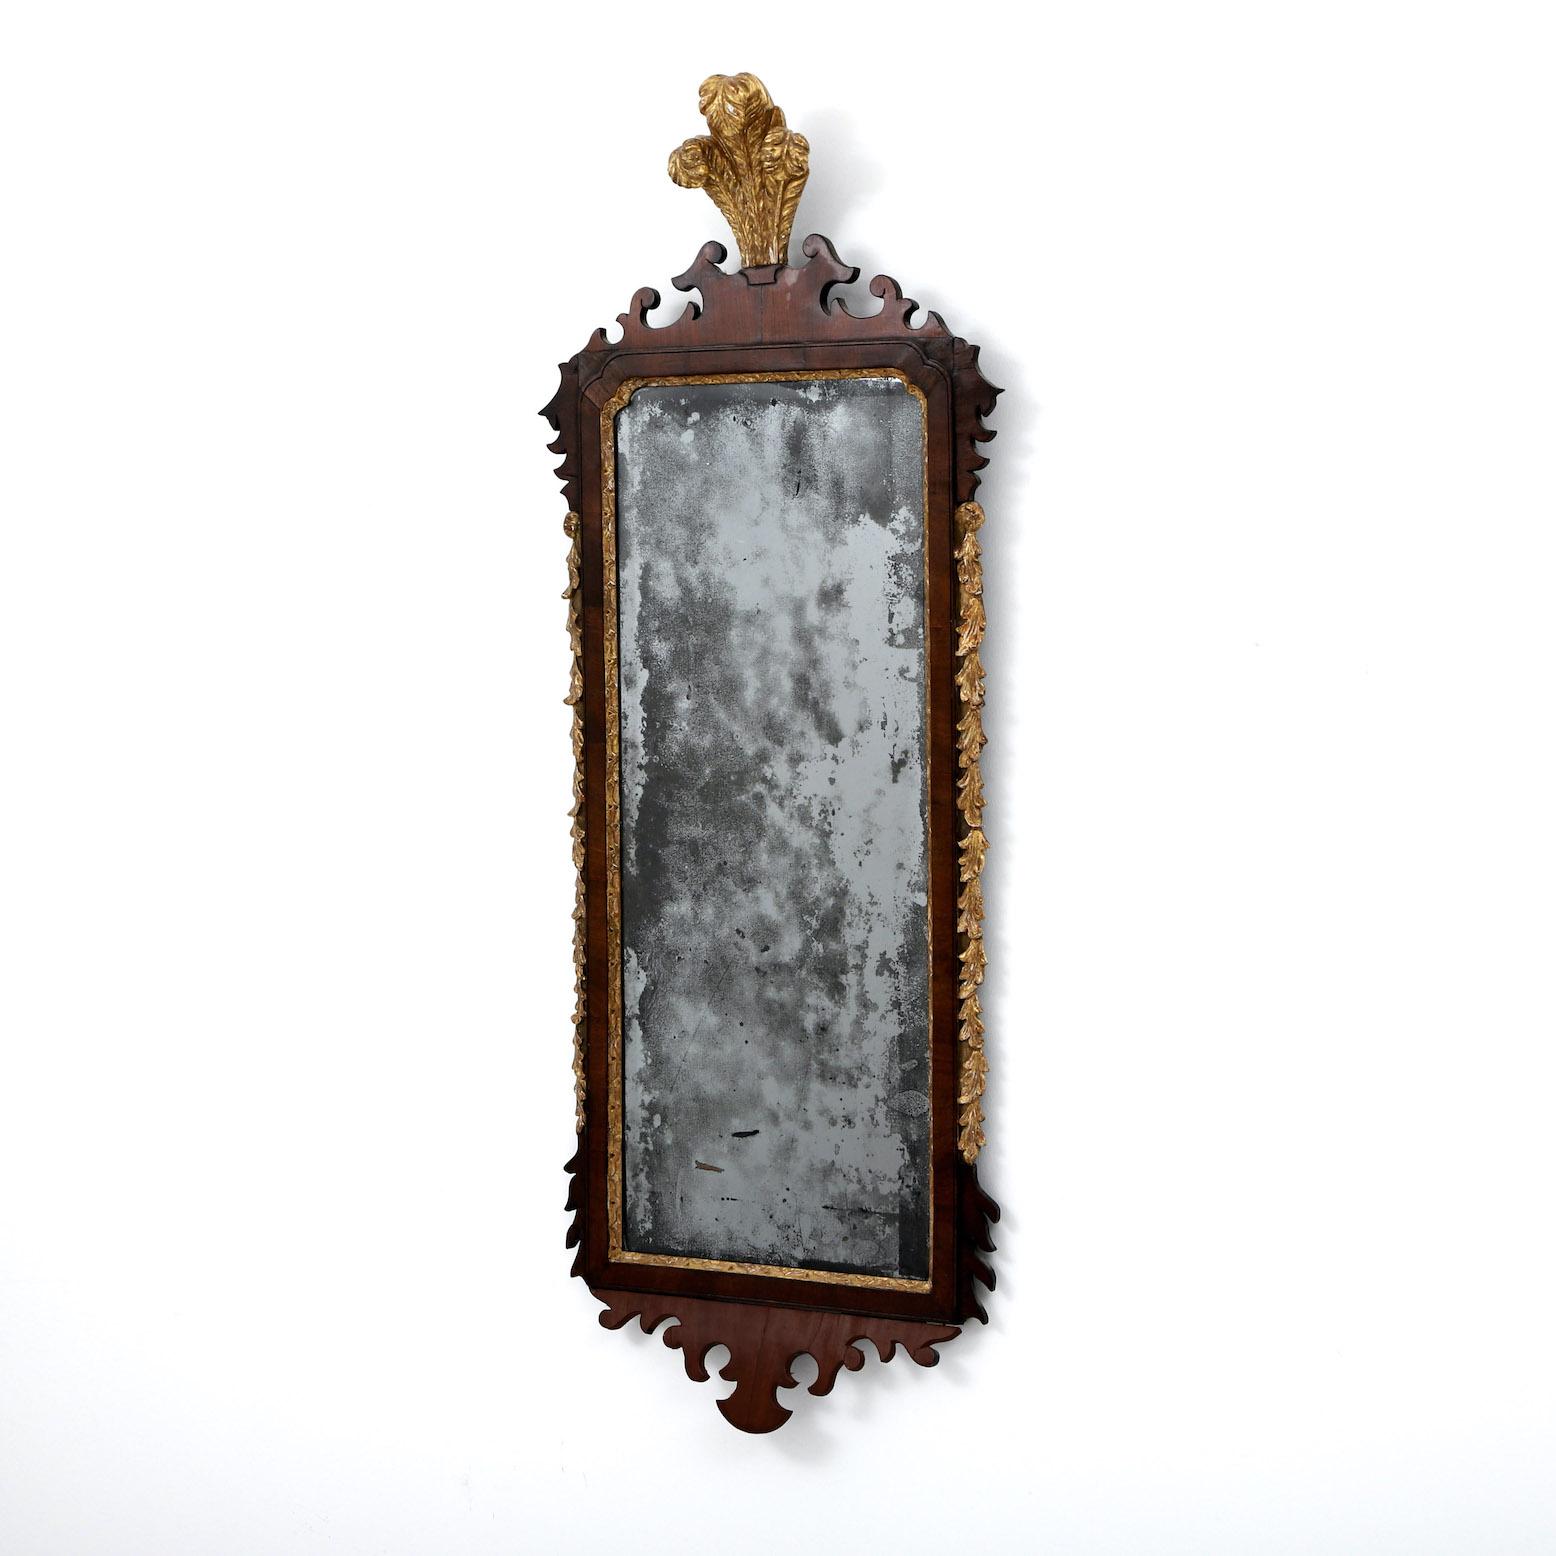 We presents a fine George I walnut and parcel gilt mirror.

England, Circa 1720.

” An elegant George I pier mirror with gilded ‘Prince-of-Wales’ feather crest, above a shaped rectangular bevelled plate within an incised gilt border and mahogany